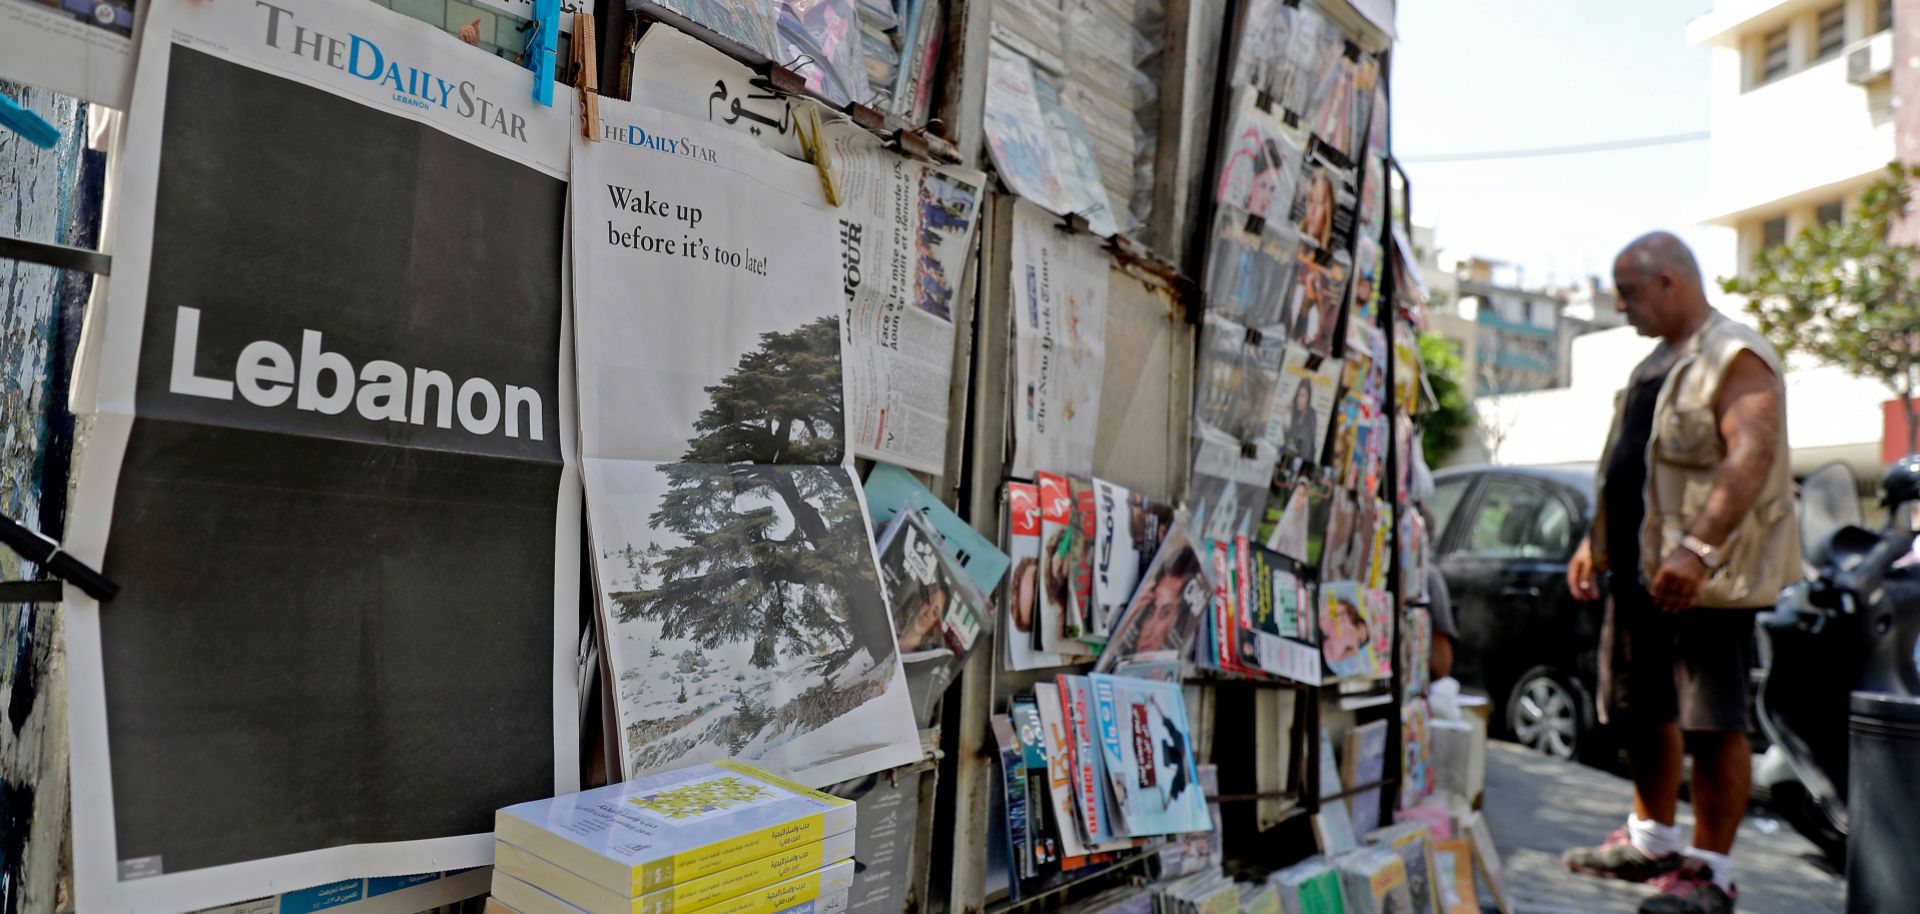 A picture taken on Aug. 8, 2019, in Beirut shows the front pages of the Lebanese English-language Daily Star, which refrained from printing any news in protest against the country's "deteriorating situation."